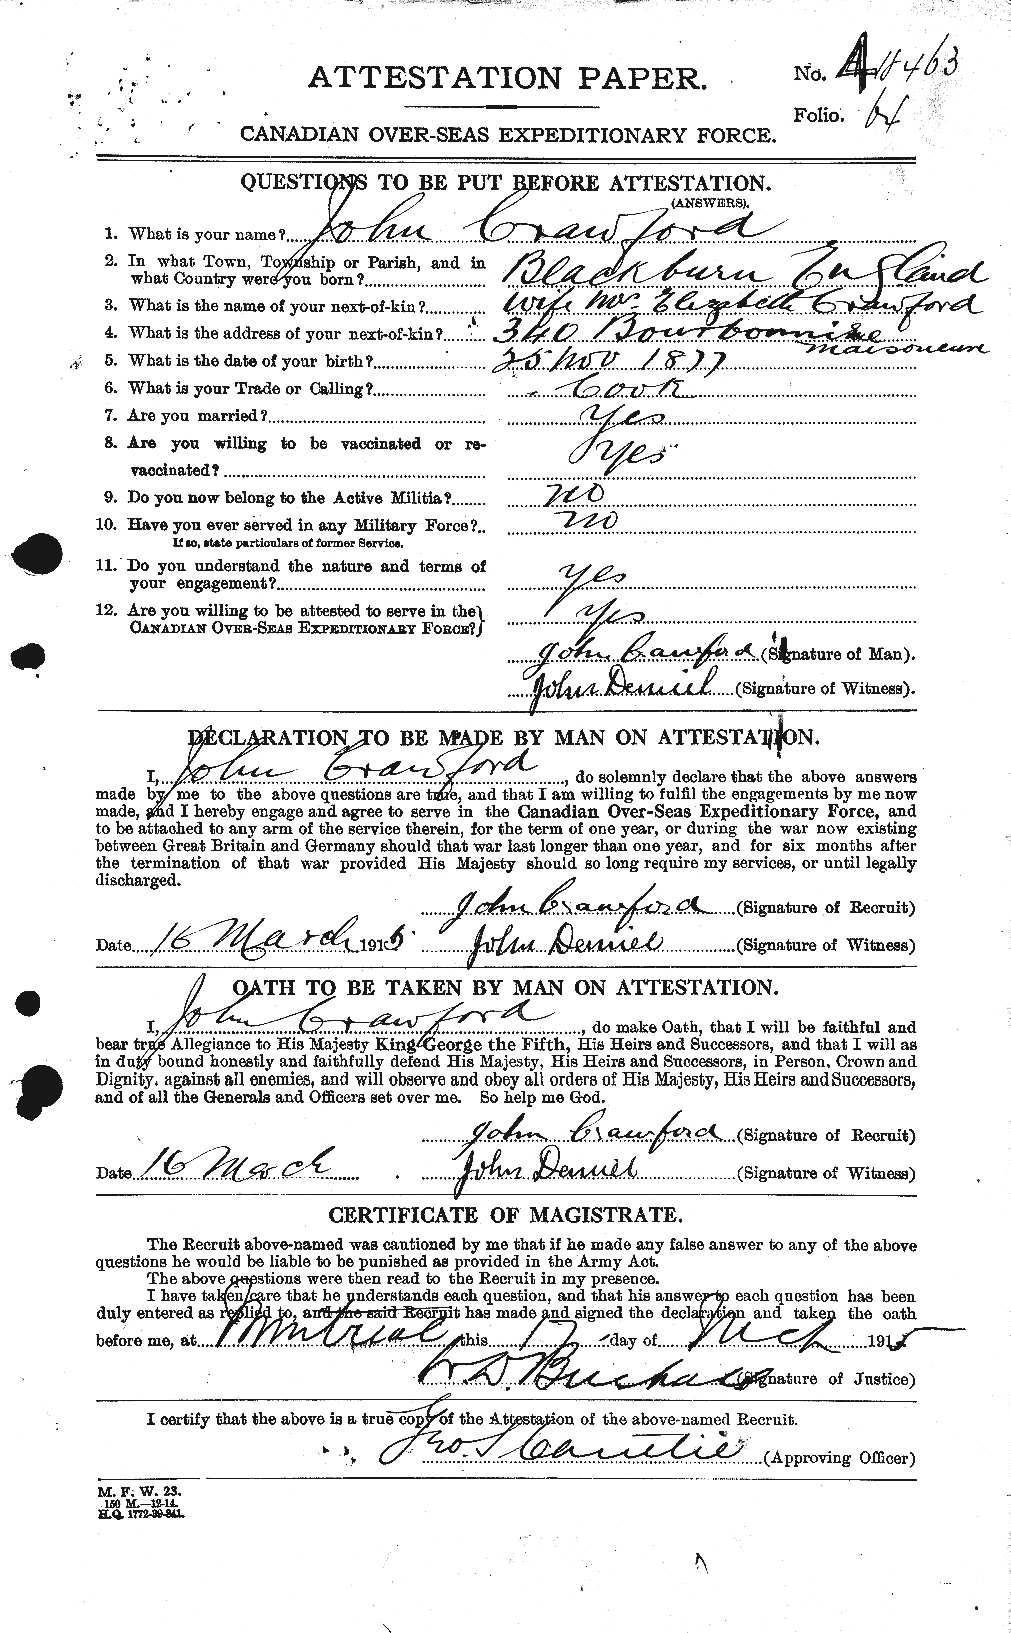 Personnel Records of the First World War - CEF 062439a